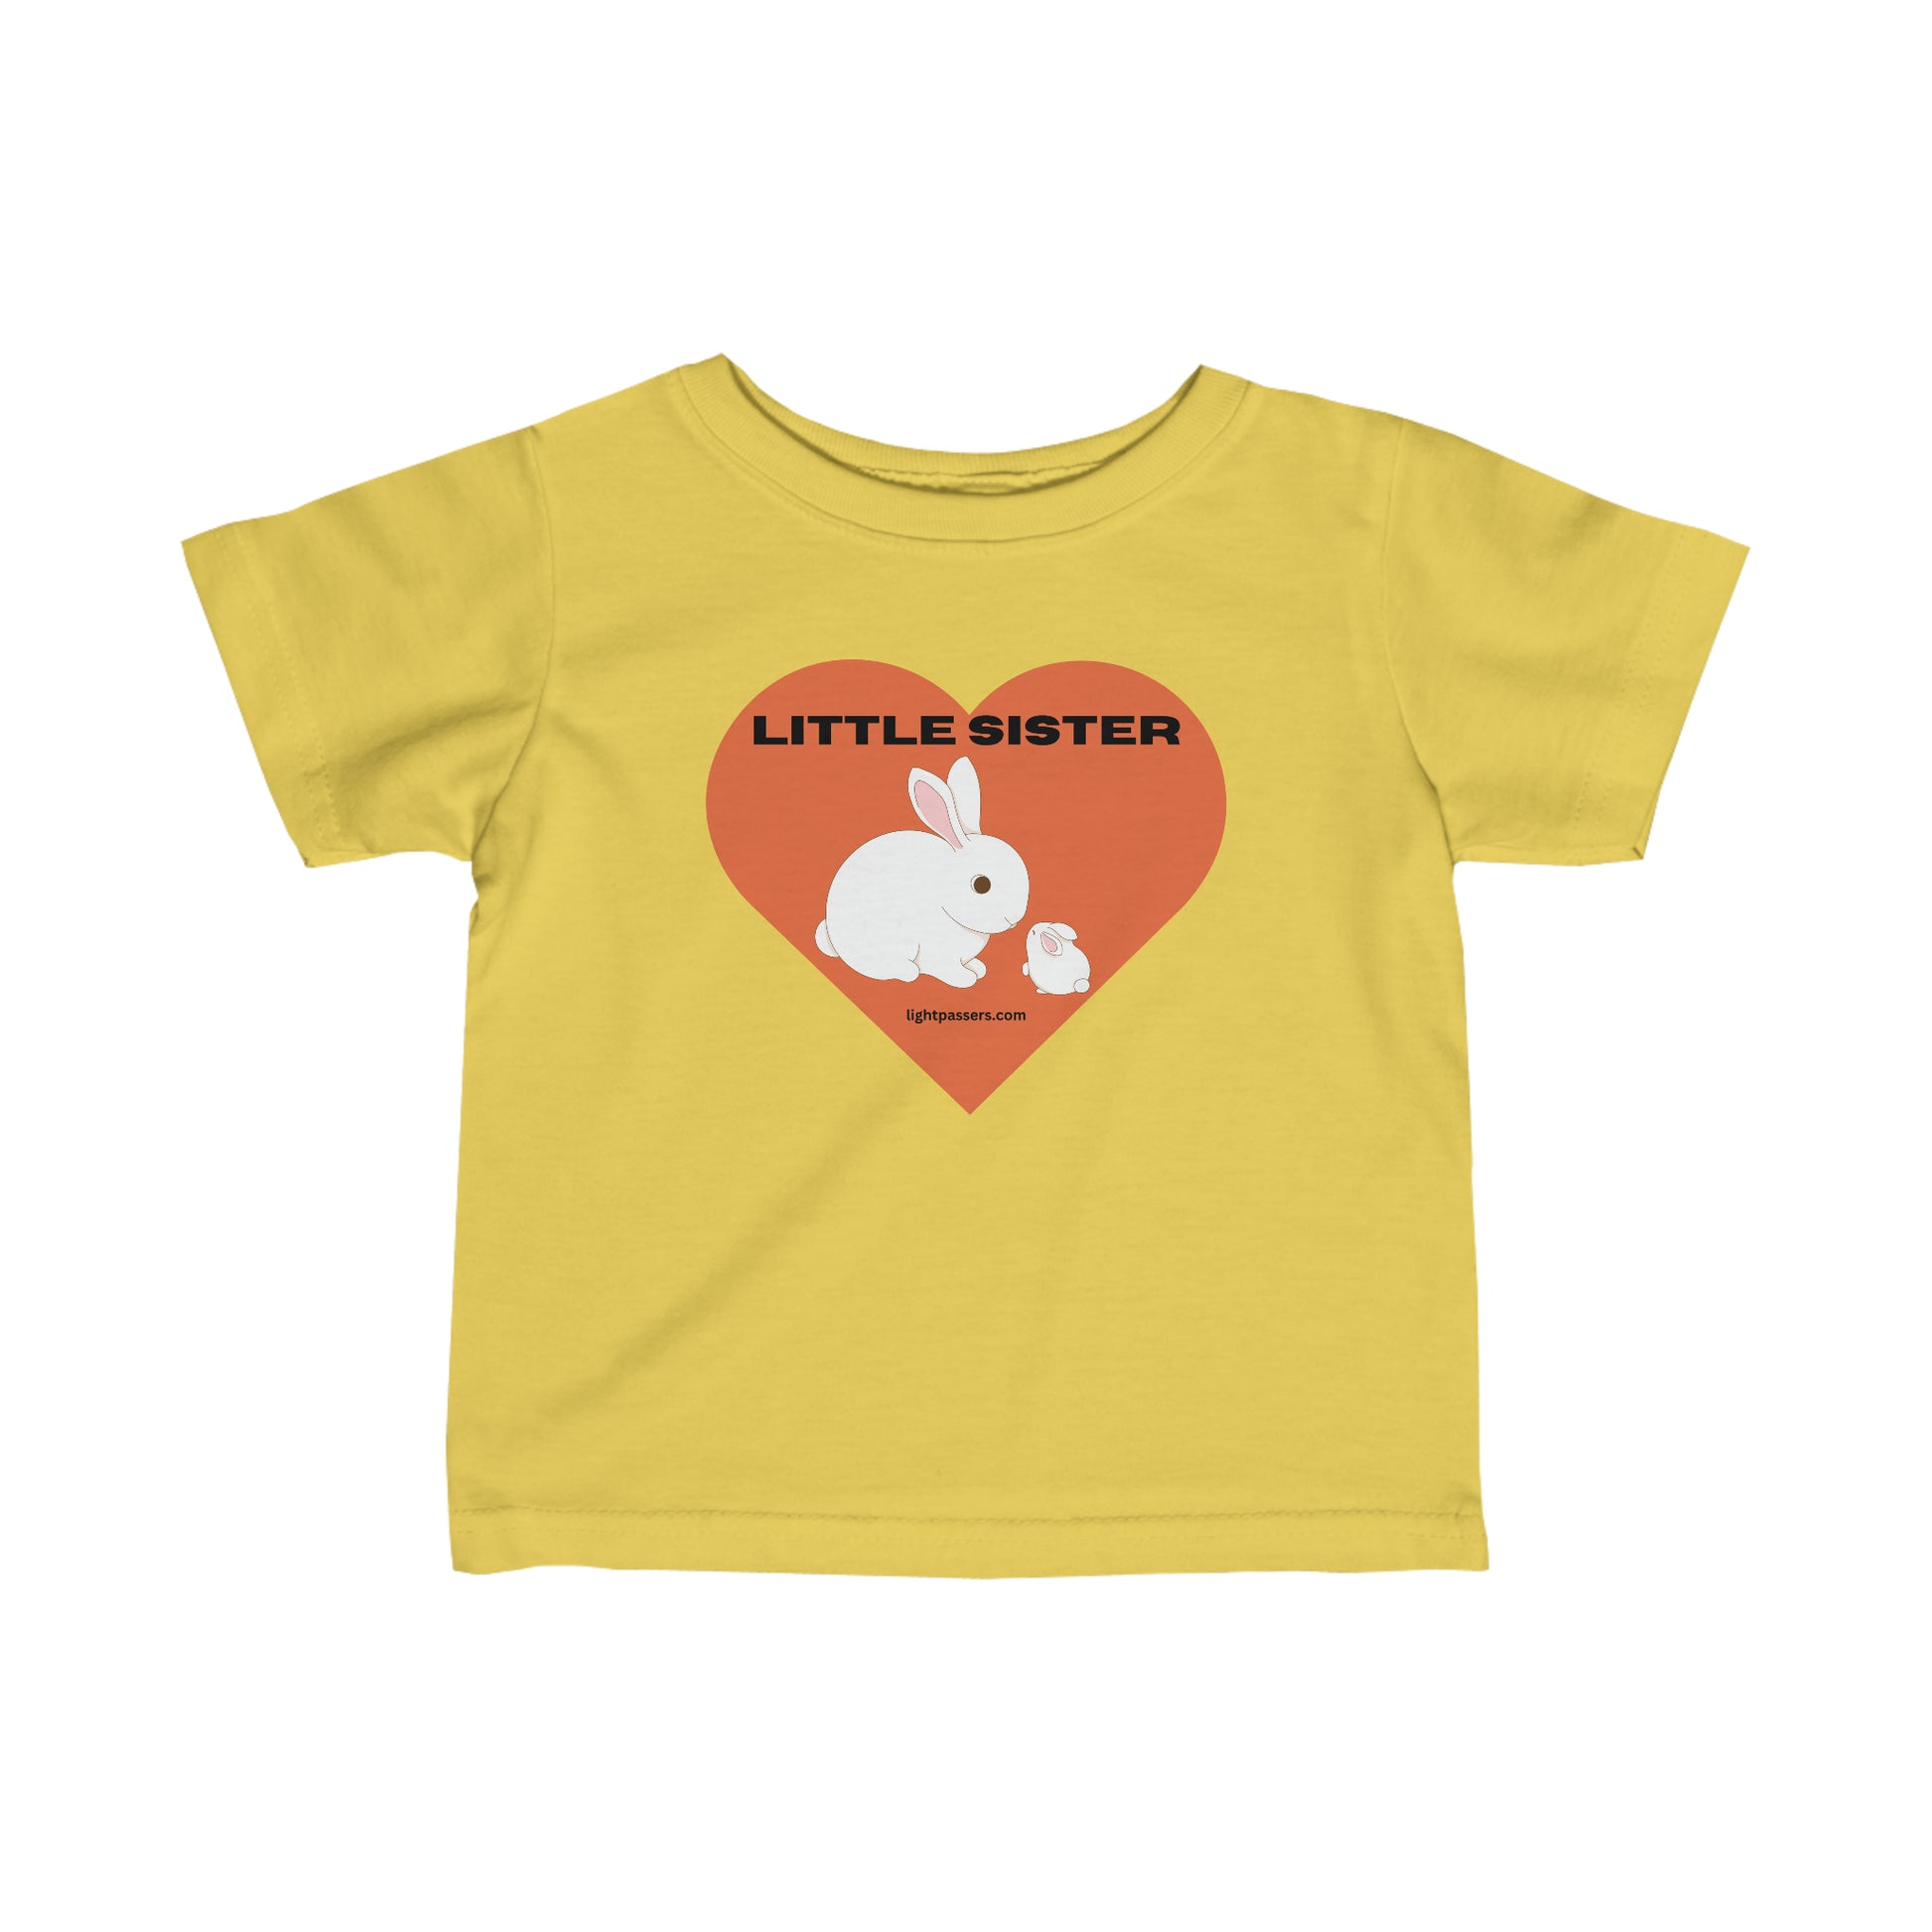 Infant fine jersey tee with a yellow shirt featuring a rabbit and heart design. Side seams, ribbed knitting, and taped shoulders for durability and comfort. Little Sister Baby T-shirts.